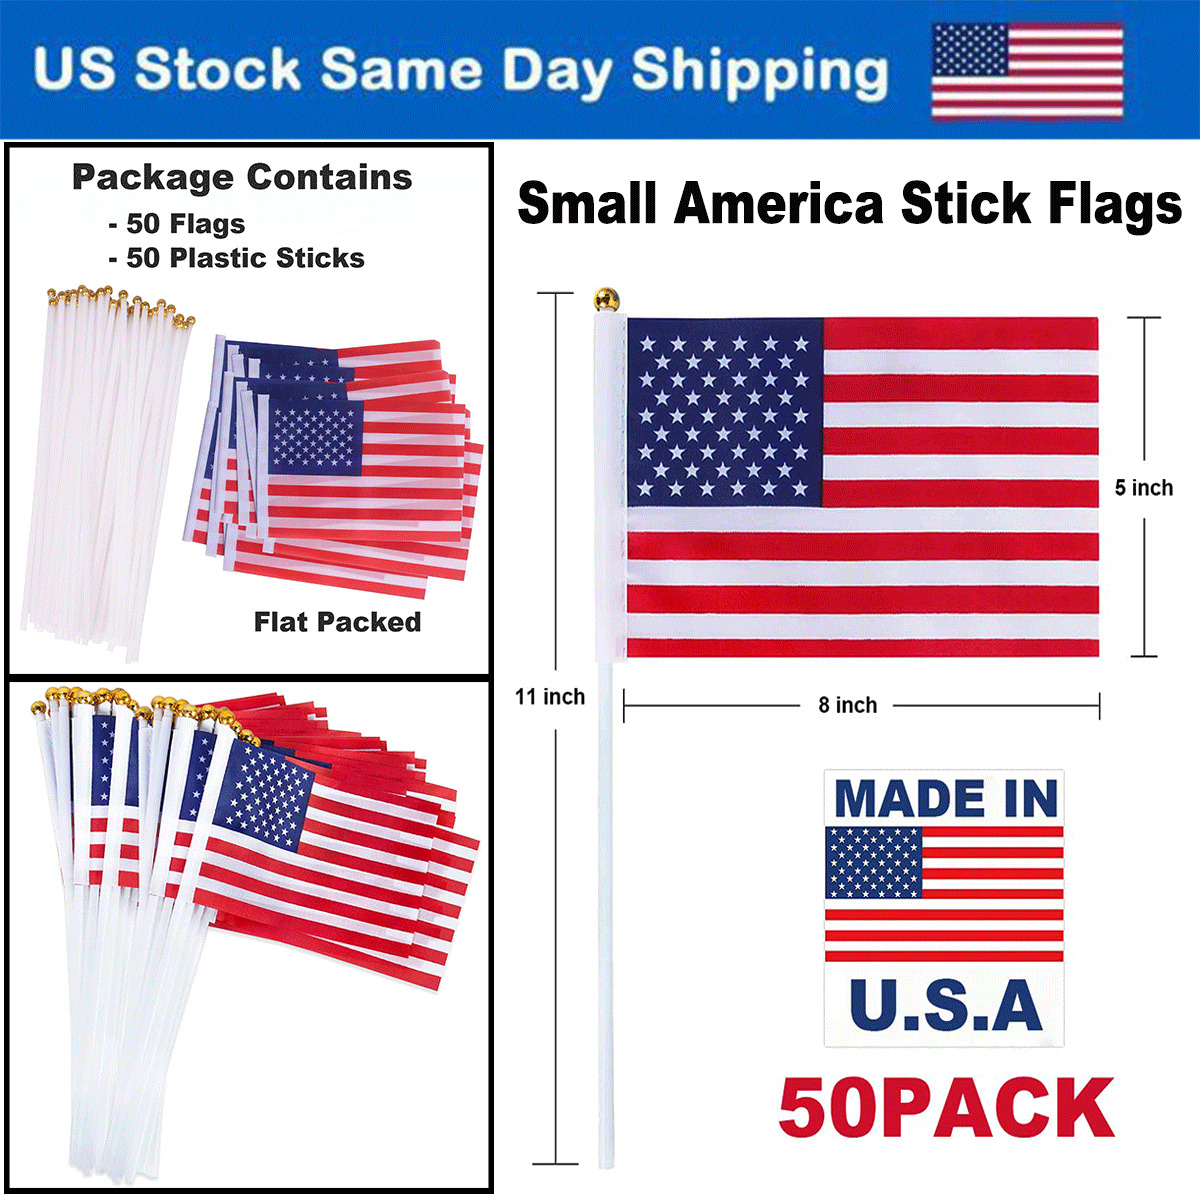 5 x 8 in American Flags US Flags / Mini American Country Flag on Stick Small USA